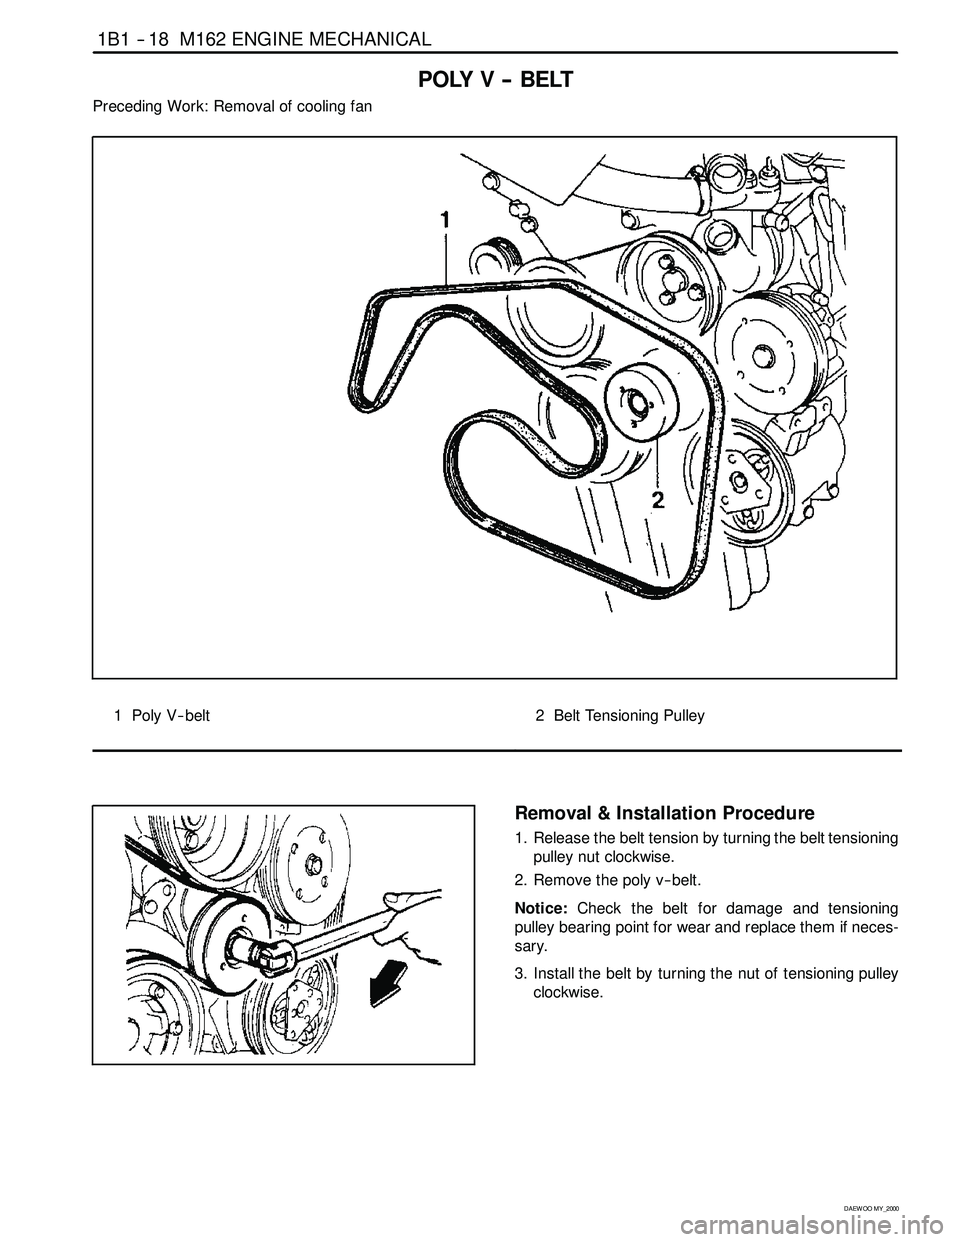 SSANGYONG KORANDO 1997  Service Repair Manual 1B1 -- 18 M162 ENGINE MECHANICAL
D AEW OO M Y_2000
POLY V -- BELT
Preceding Work: Removal of cooling fan
1 Poly V-- belt2 Belt Tensioning Pulley
Removal & Installation Procedure
1. Release the belt te